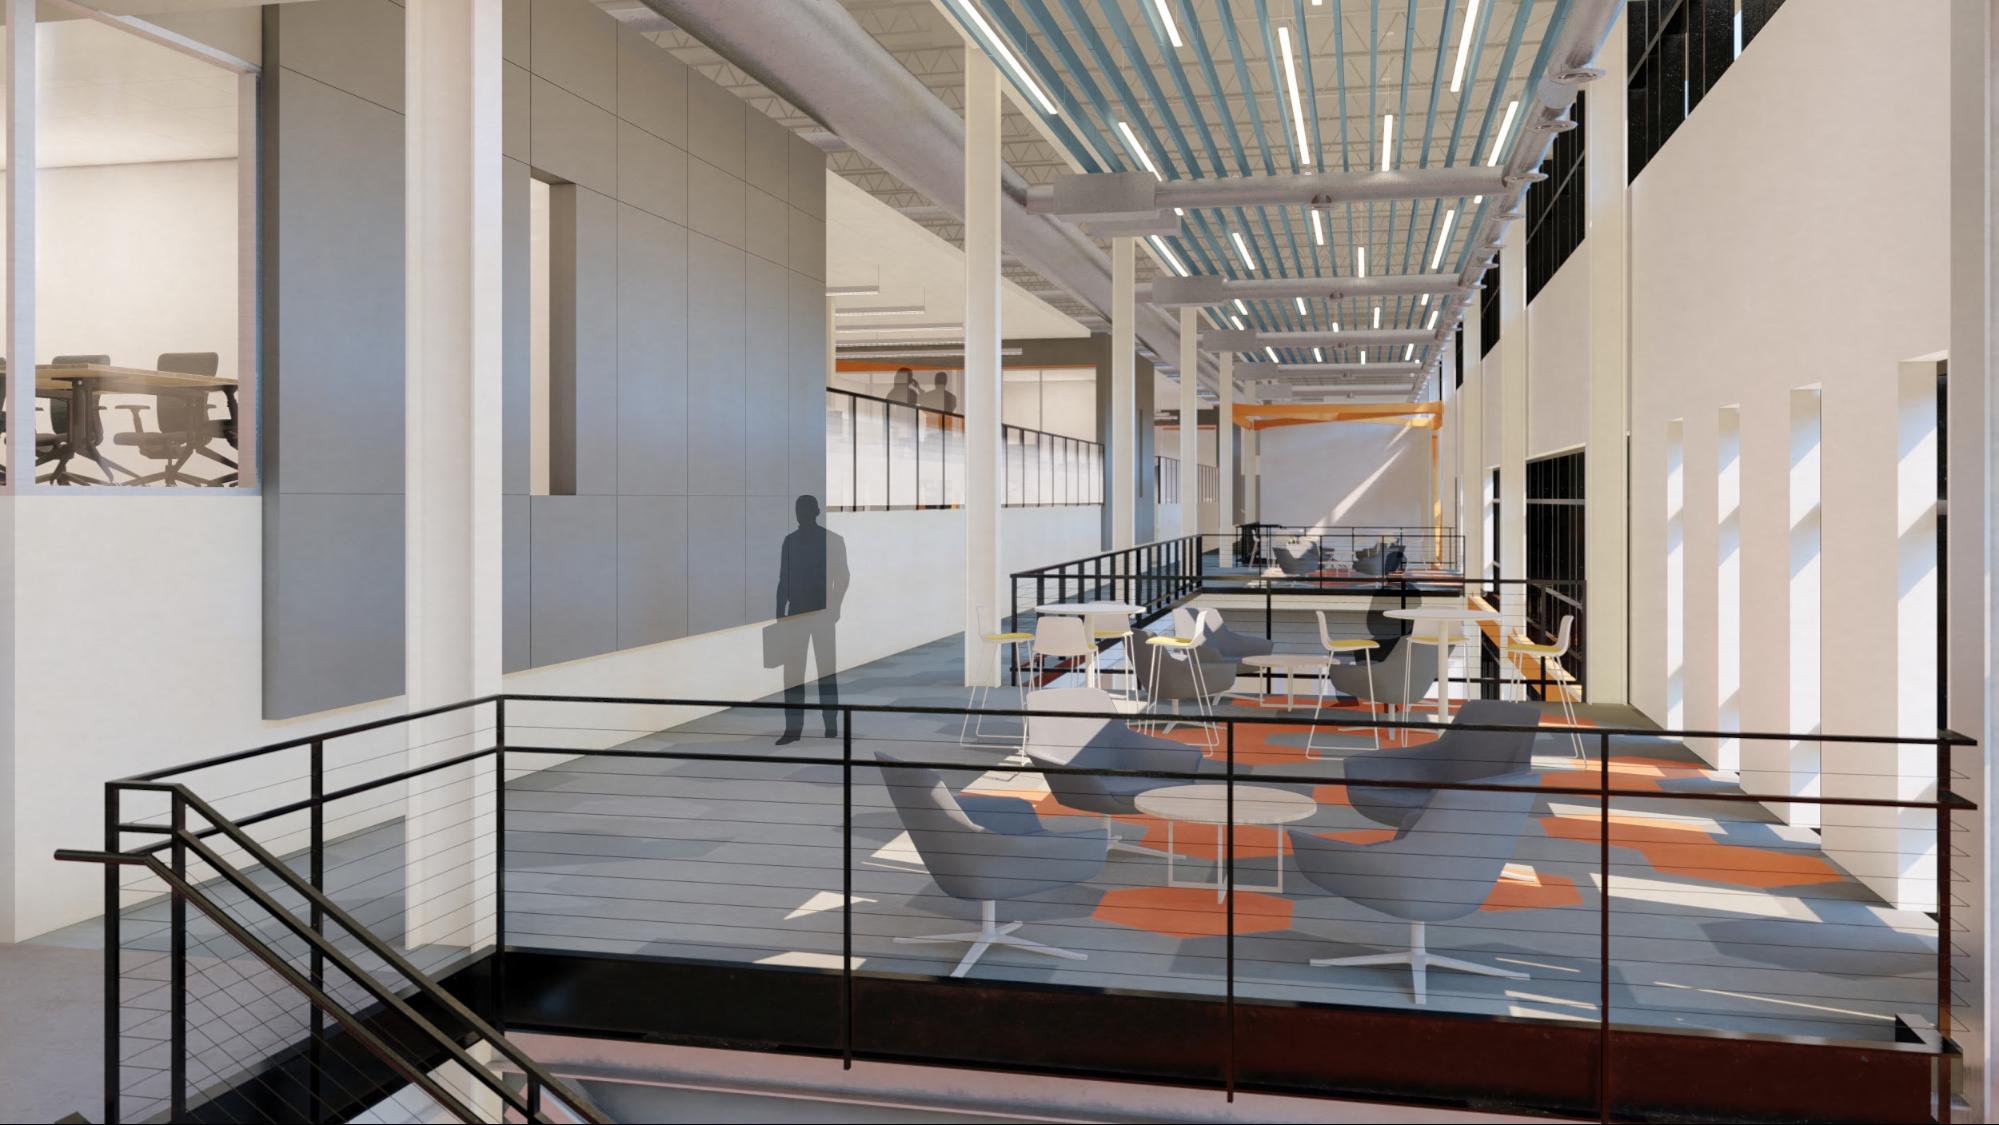 See How SketchUp Facilitates the Build-Out of a 14-Acre Campus for Biological Science